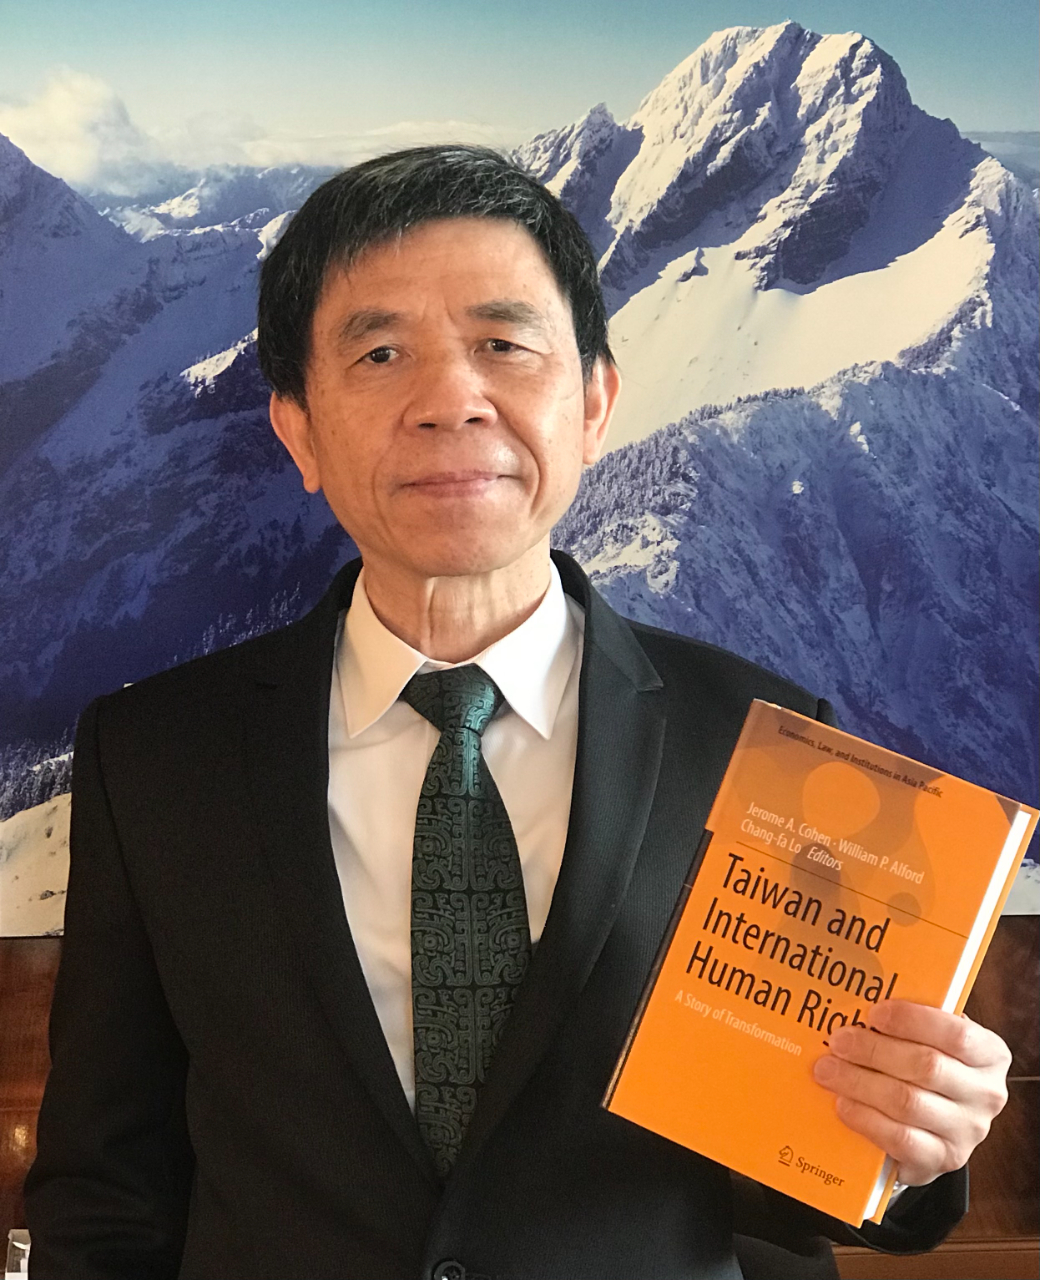 “Taiwan and International Human Rights: A Story of Transformation”  